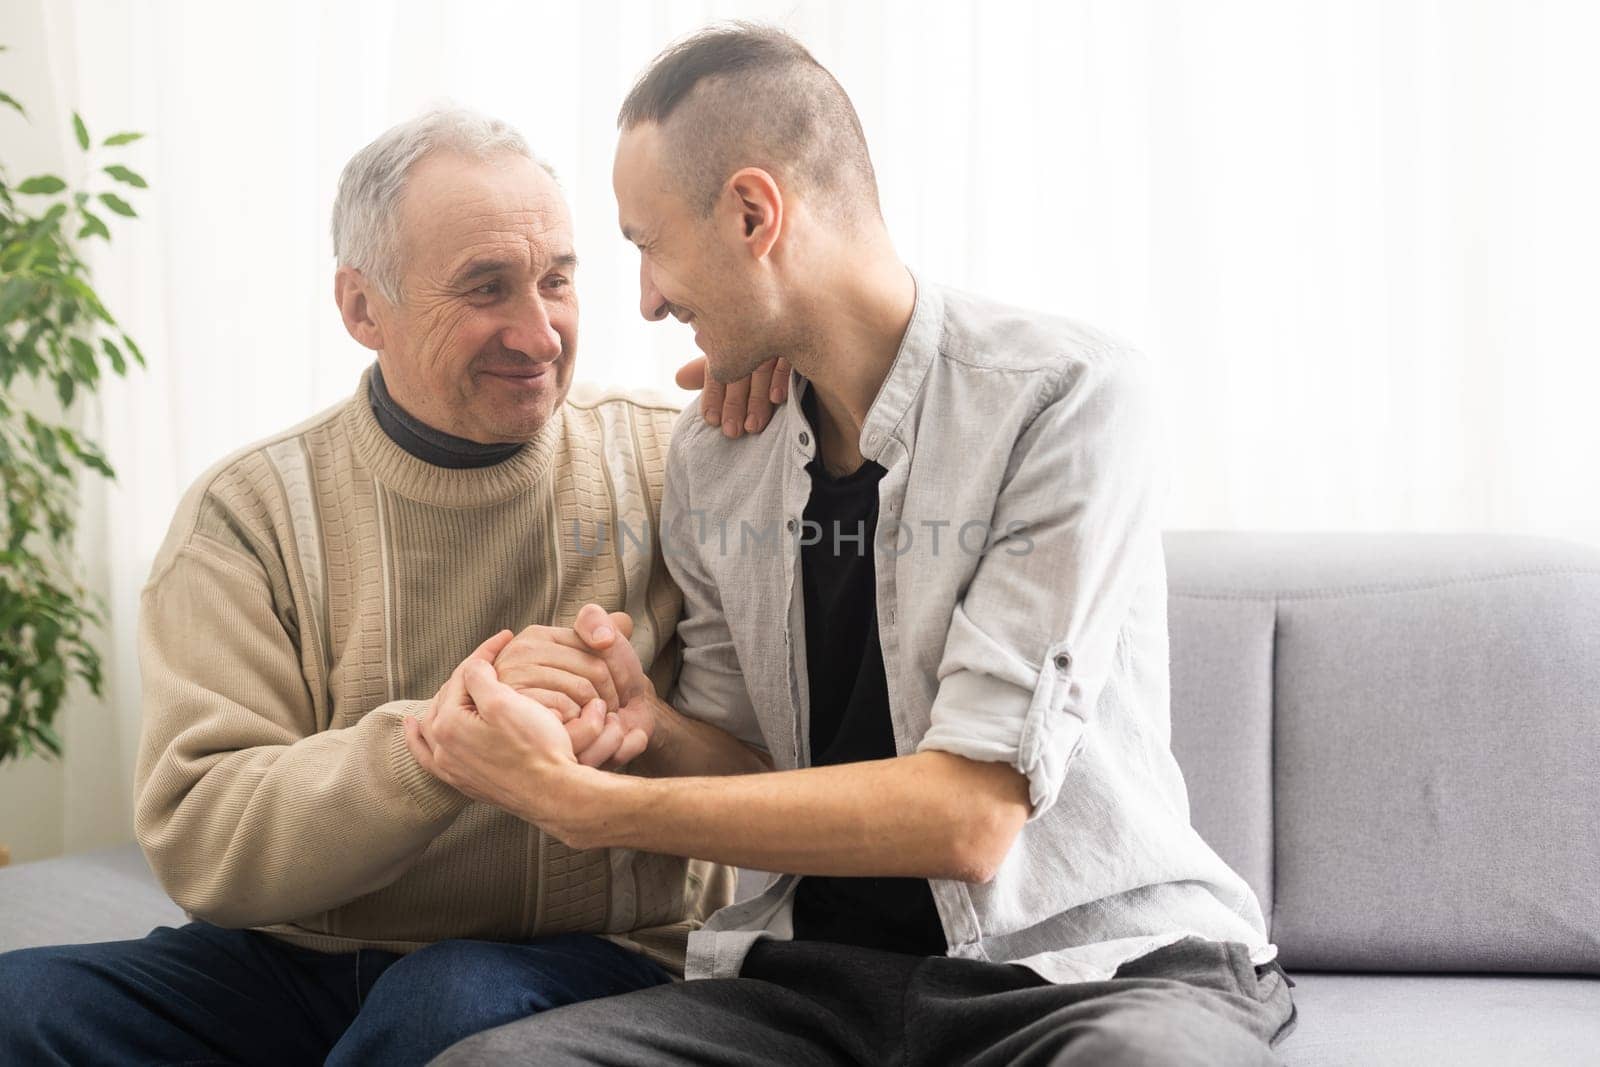 Happy two generations male family old senior mature father and smiling young adult grown son enjoying talking chatting bonding relaxing having friendly positive conversation sit on sofa at home